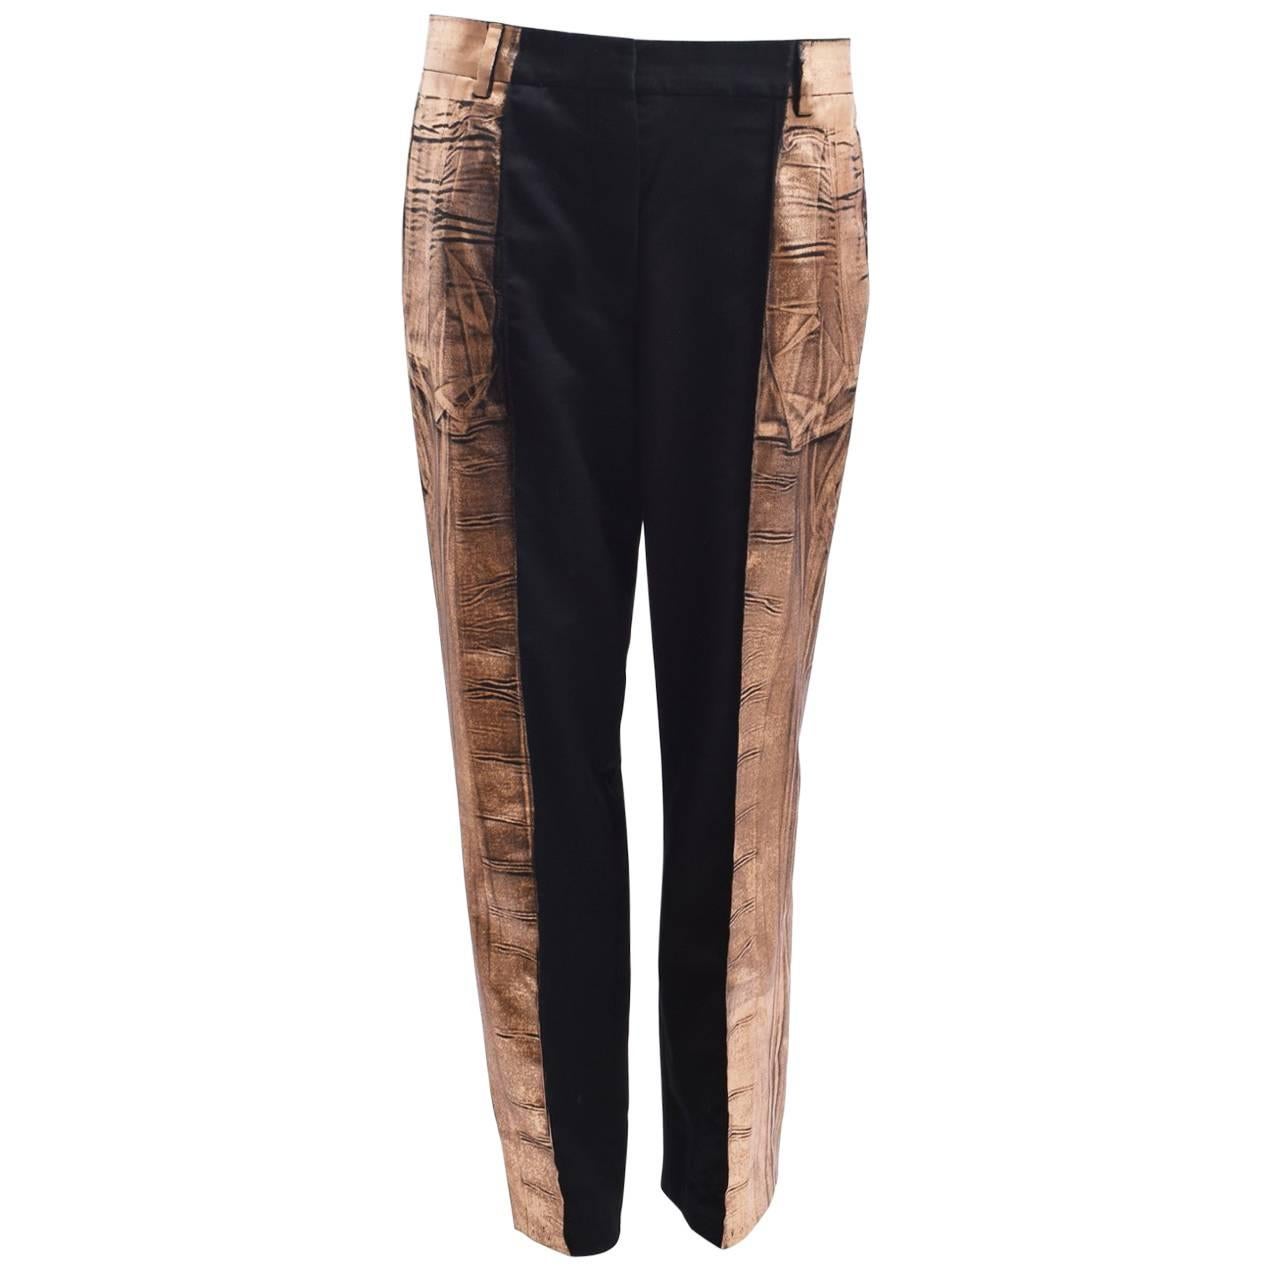 Maison Martin Margiela Black Wool Trousers with Metallic Bronze ‘Paint’  For Sale